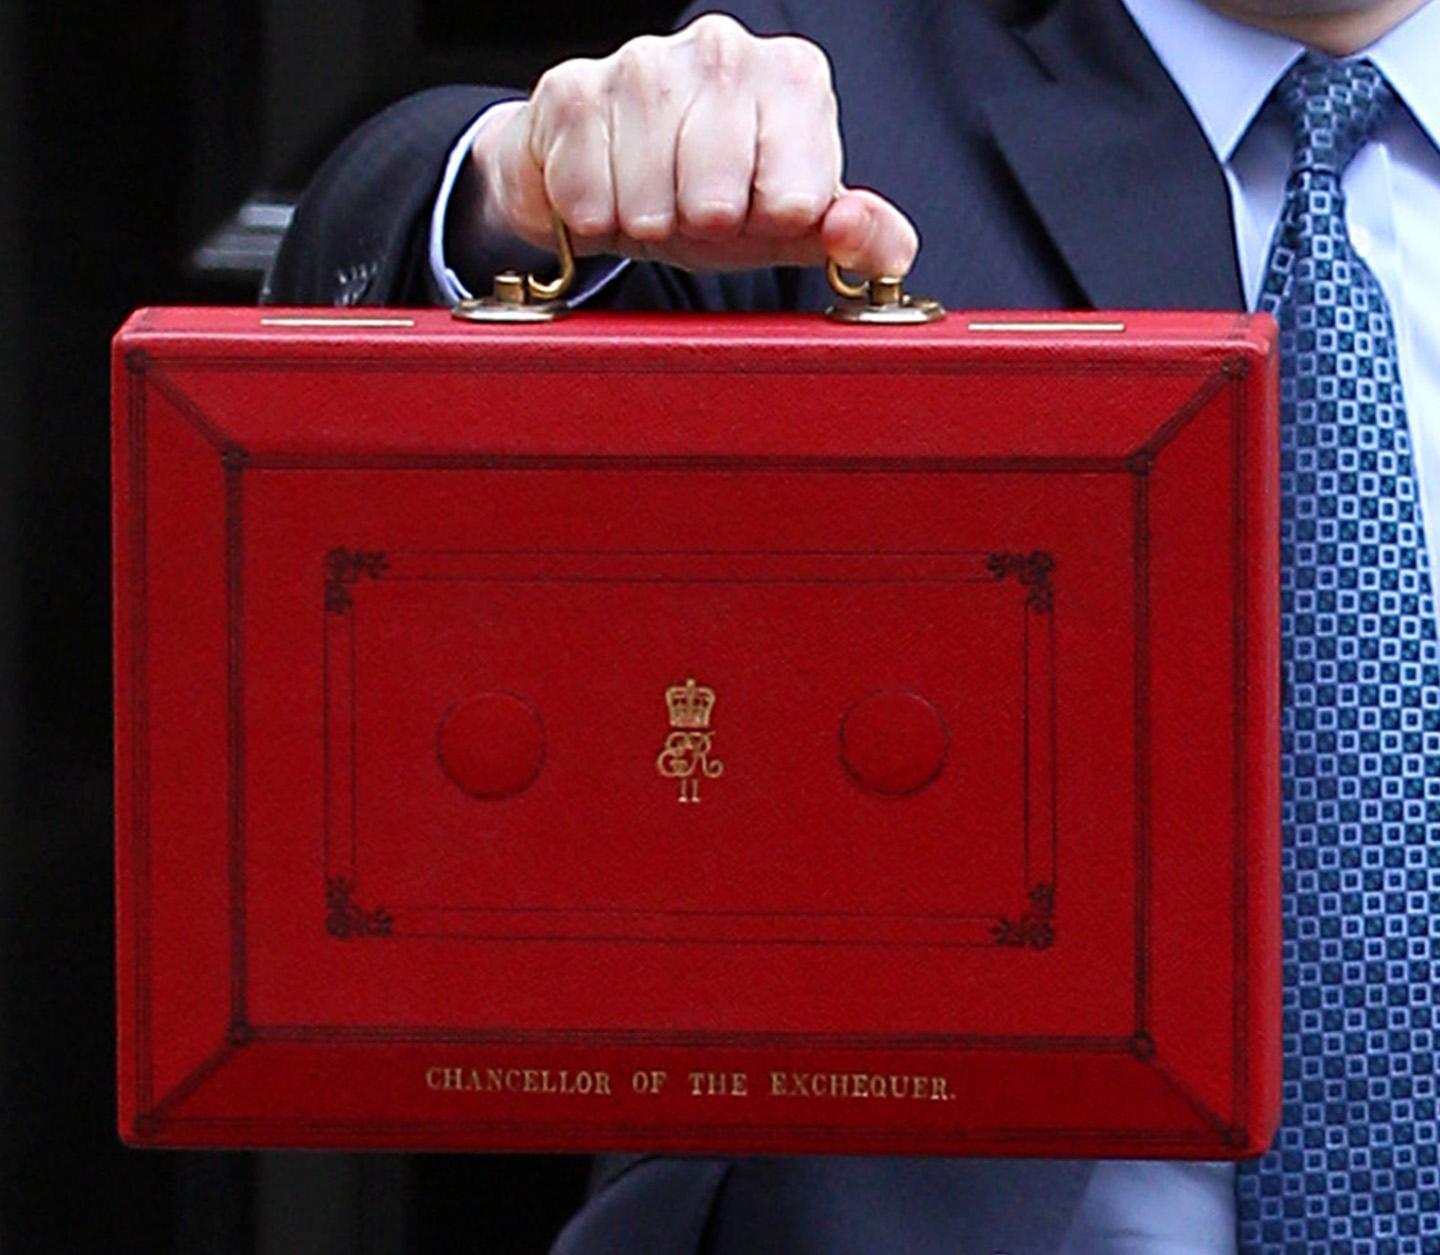 Chancellor of the Exchequer red suitcase